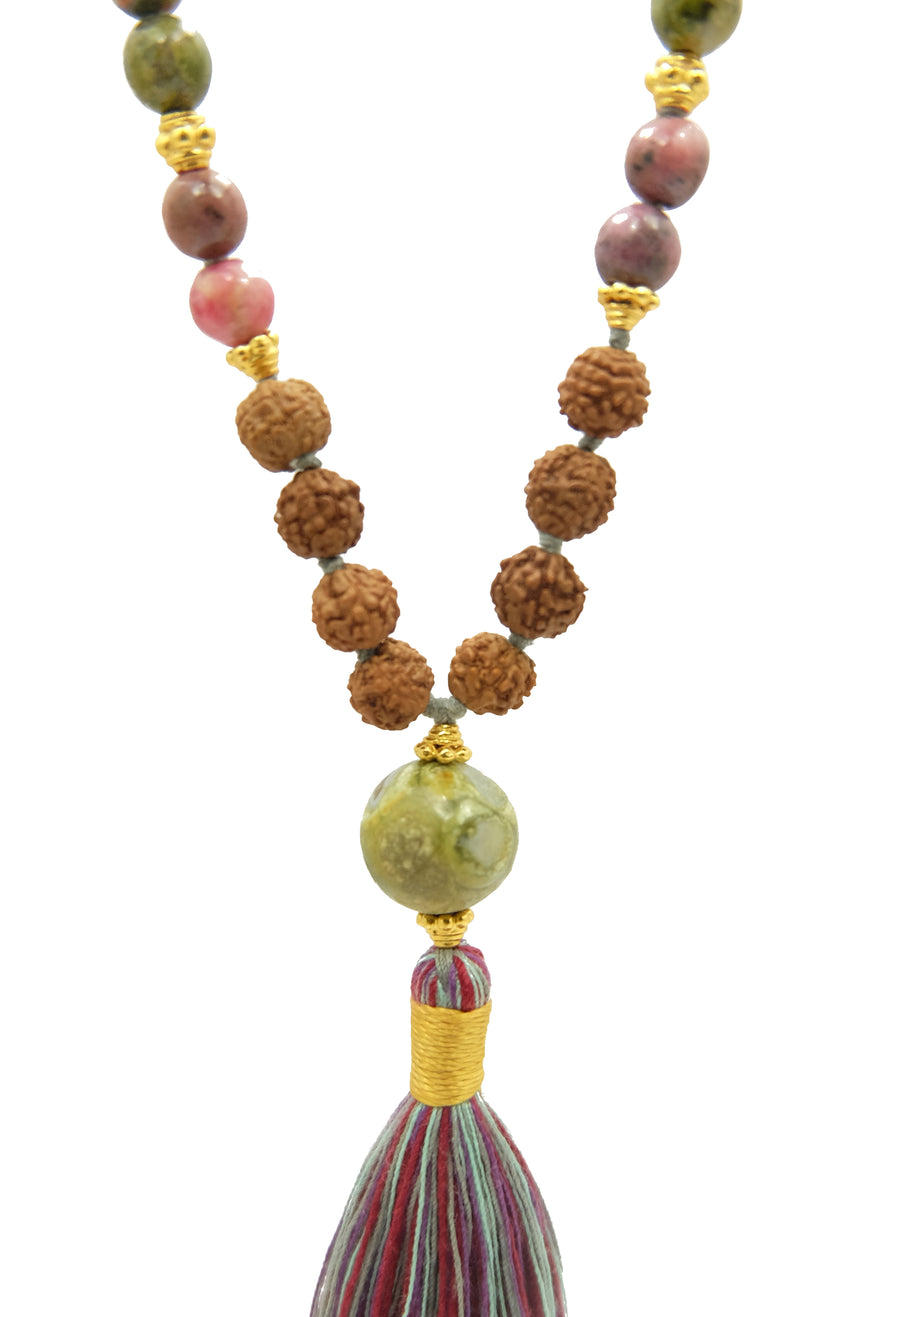 An image of a 108 prayer bead mala necklace crafted with Rudraksha, Jasper, and Rhodonite gemstones, exuding natural beauty and spiritual energy.